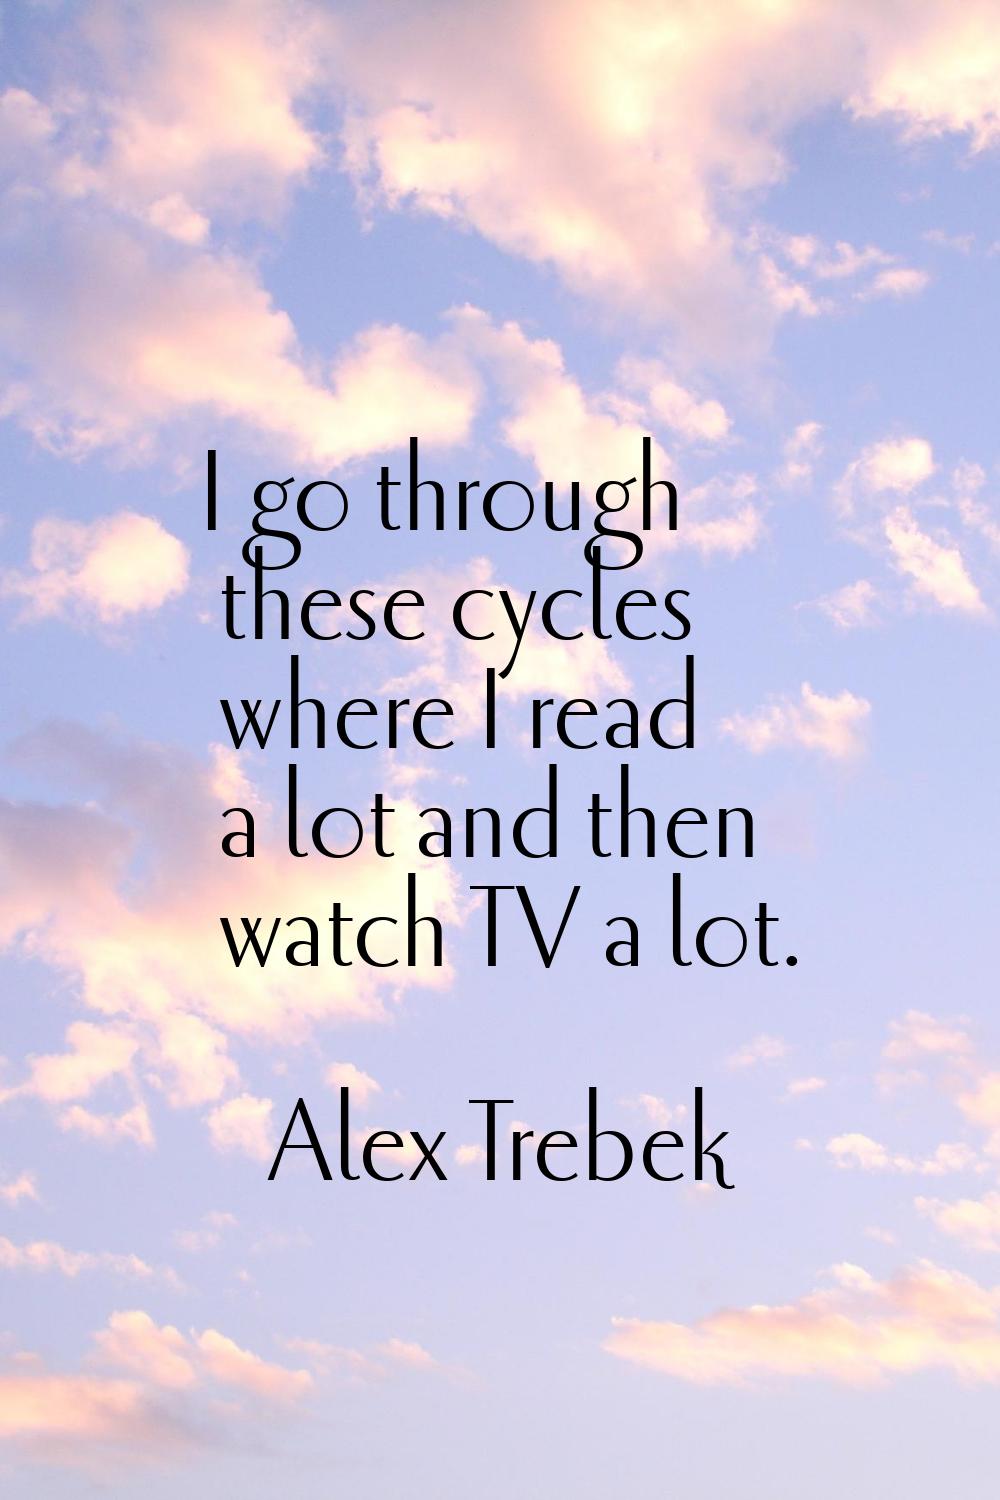 I go through these cycles where I read a lot and then watch TV a lot.